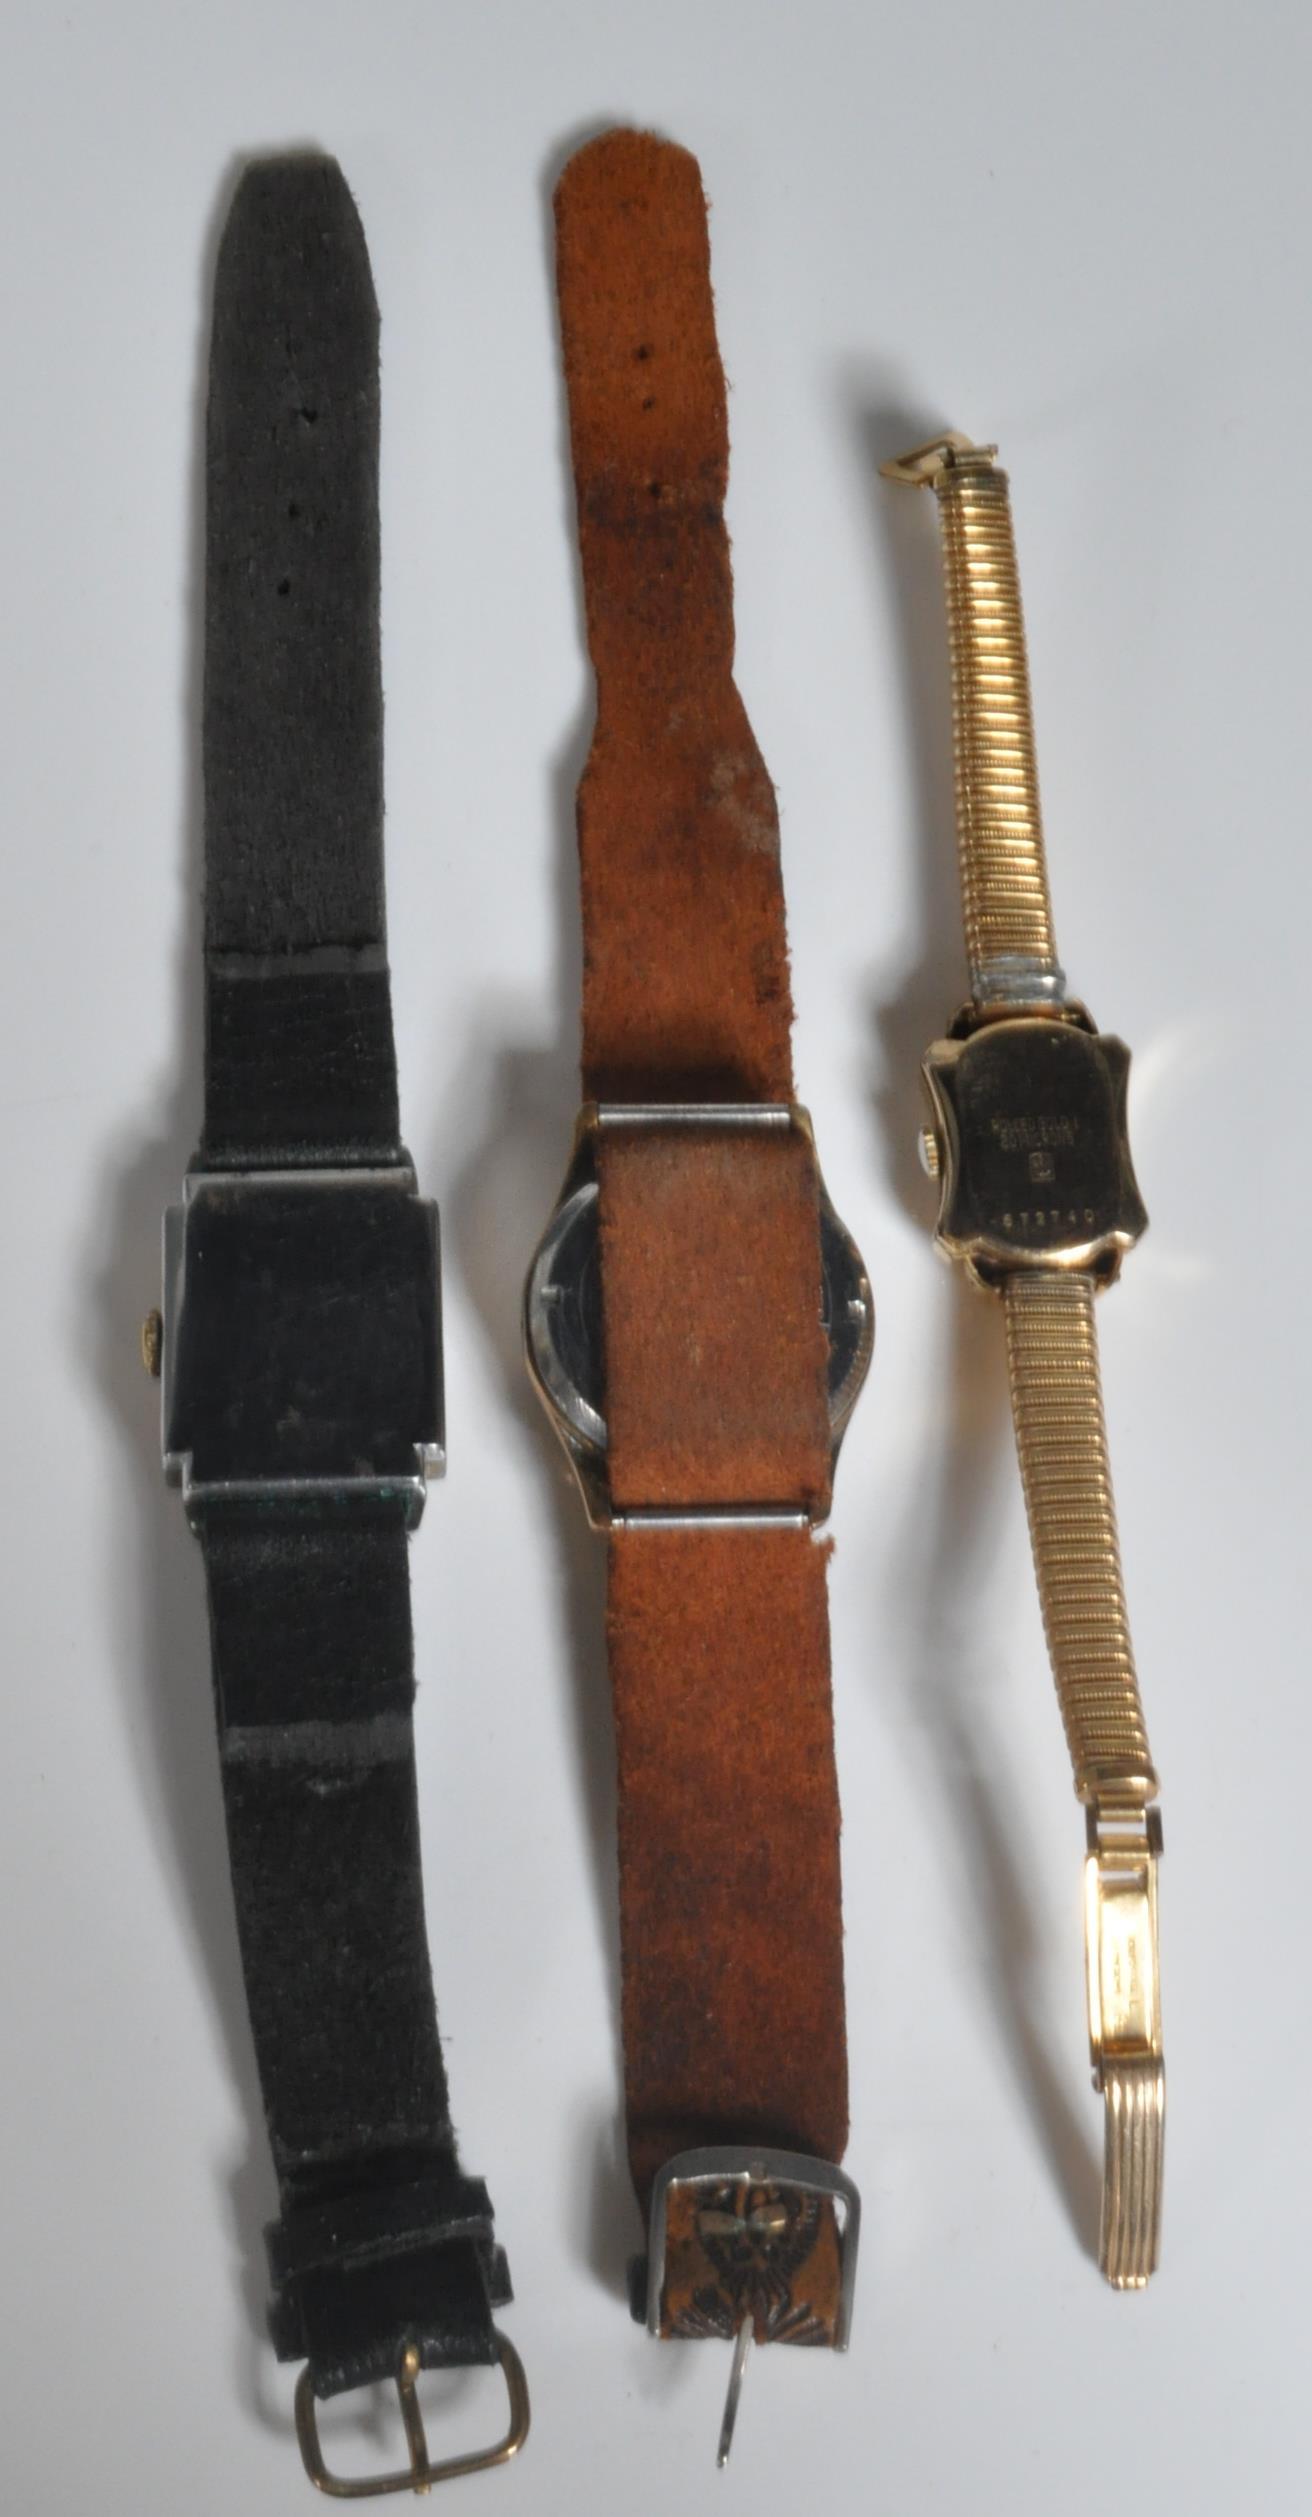 SERVICES WATCH, TANK FACED SIRO & TECHNOS WATCHES - Image 6 of 7